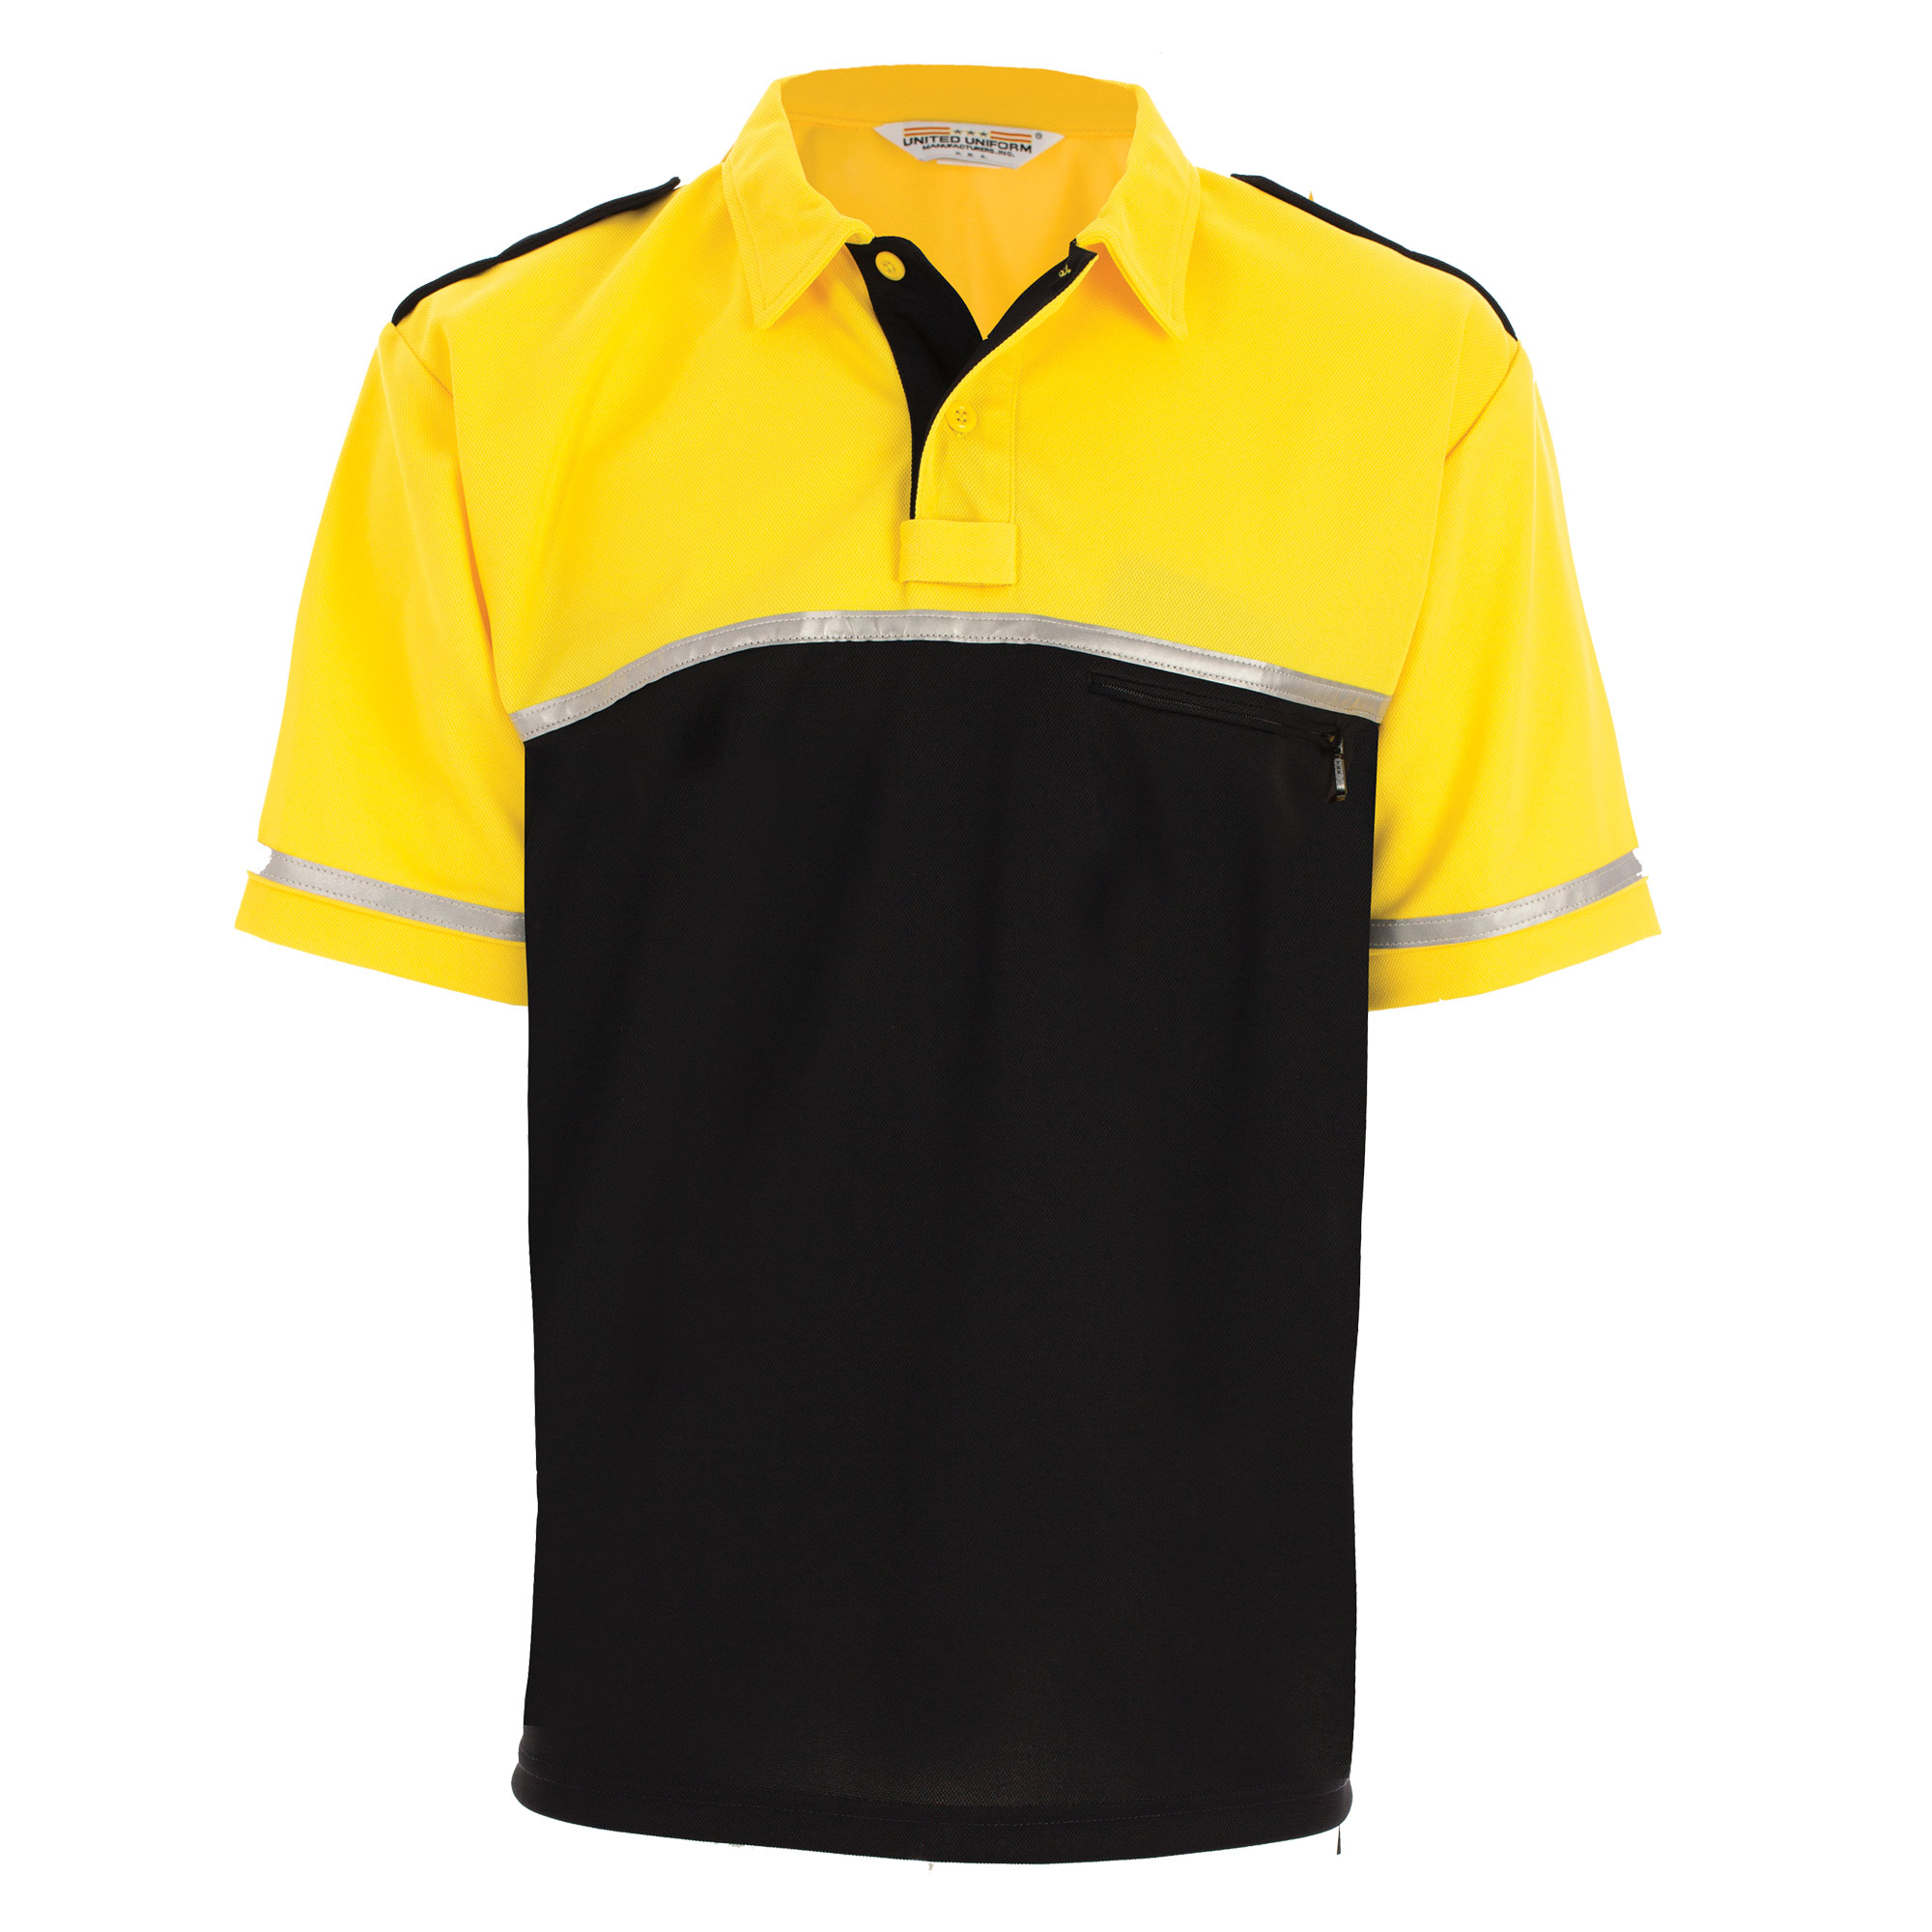 Verval tempo Goedkeuring United Uniform Mfr. Two-Tone Coolmax Polo Shirt – Tactsquad